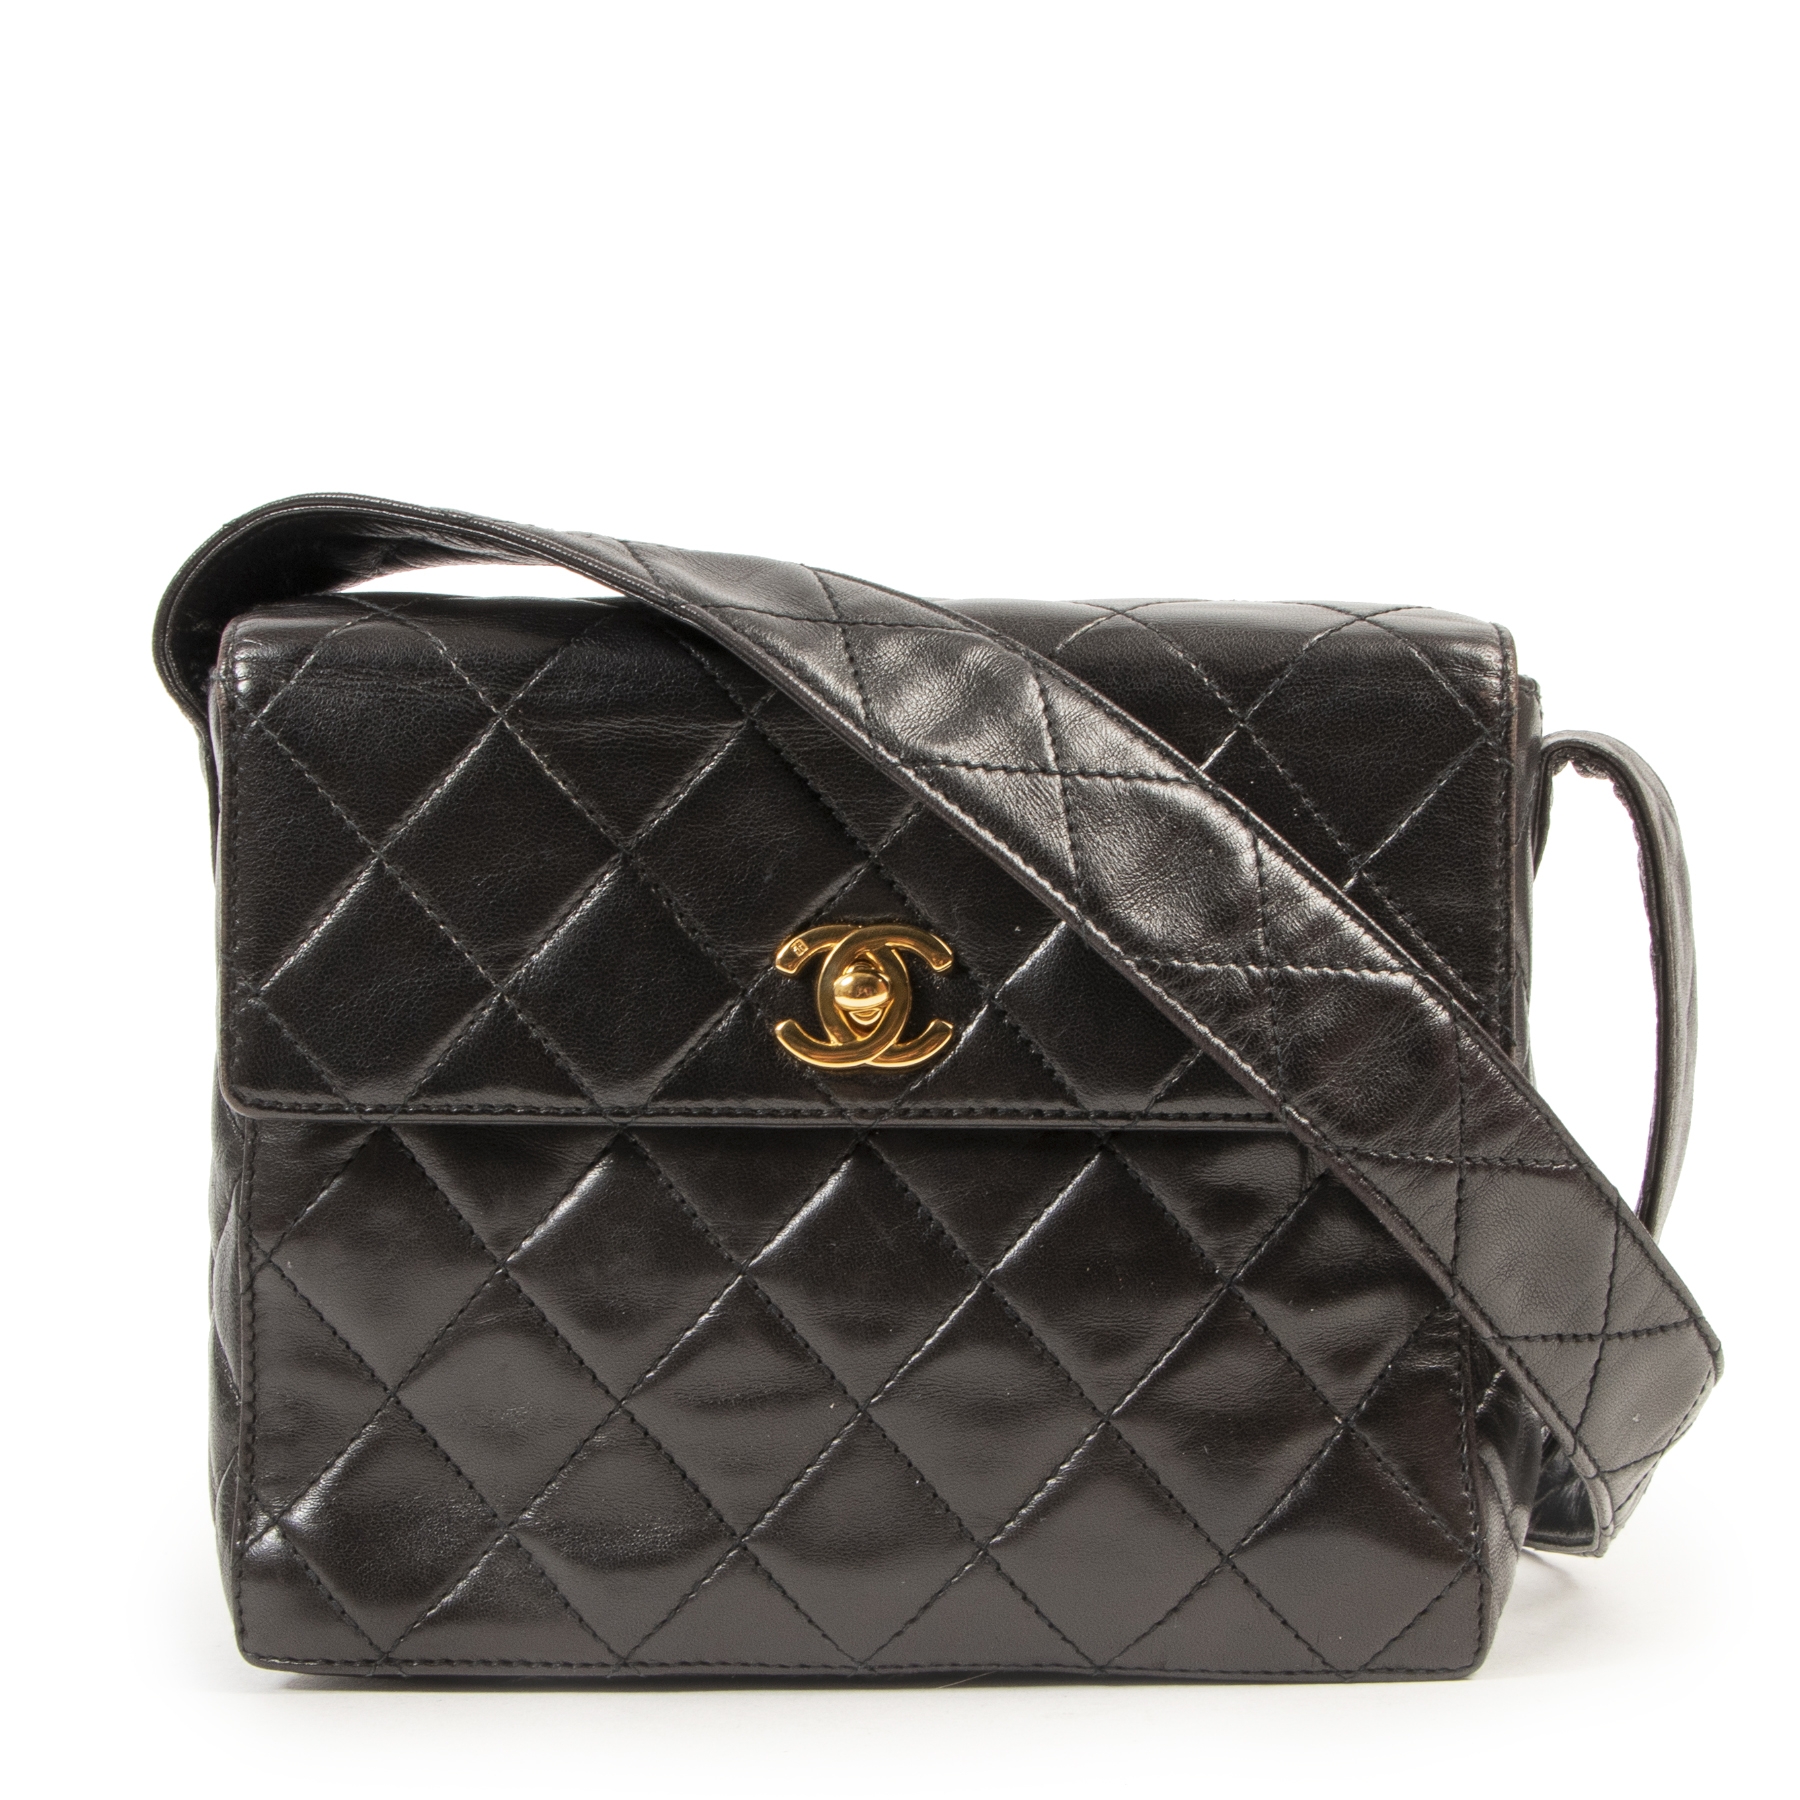 Chanel Vintage Black Quilted Lambskin Leather Crossbody Bag